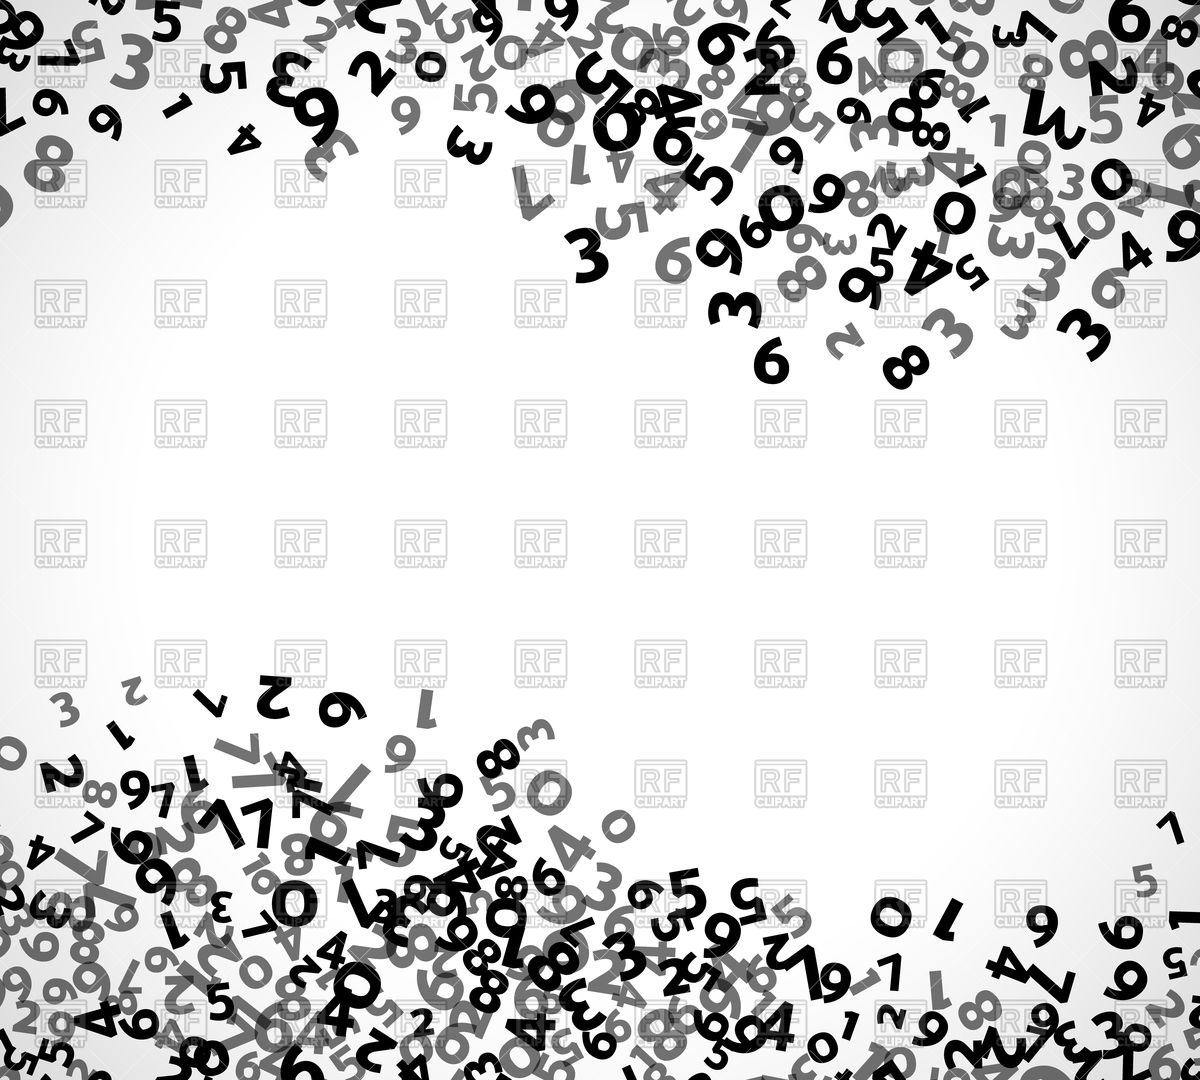 Abstract Math Number Background Vector Image Of Background